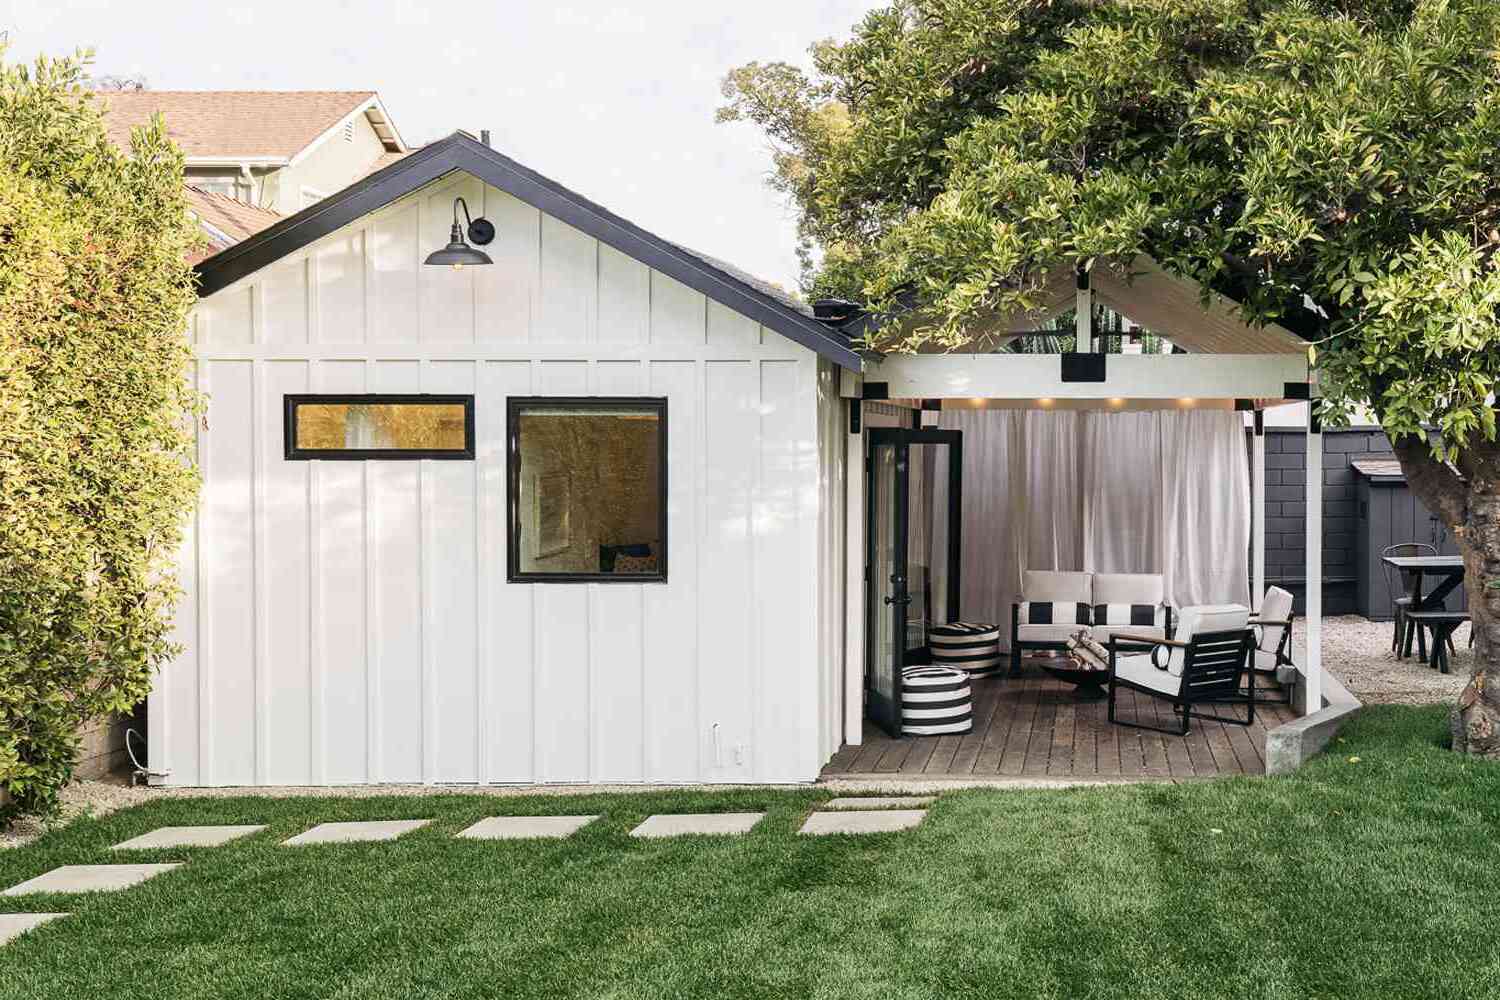 DIY: Build A Home Office Shed